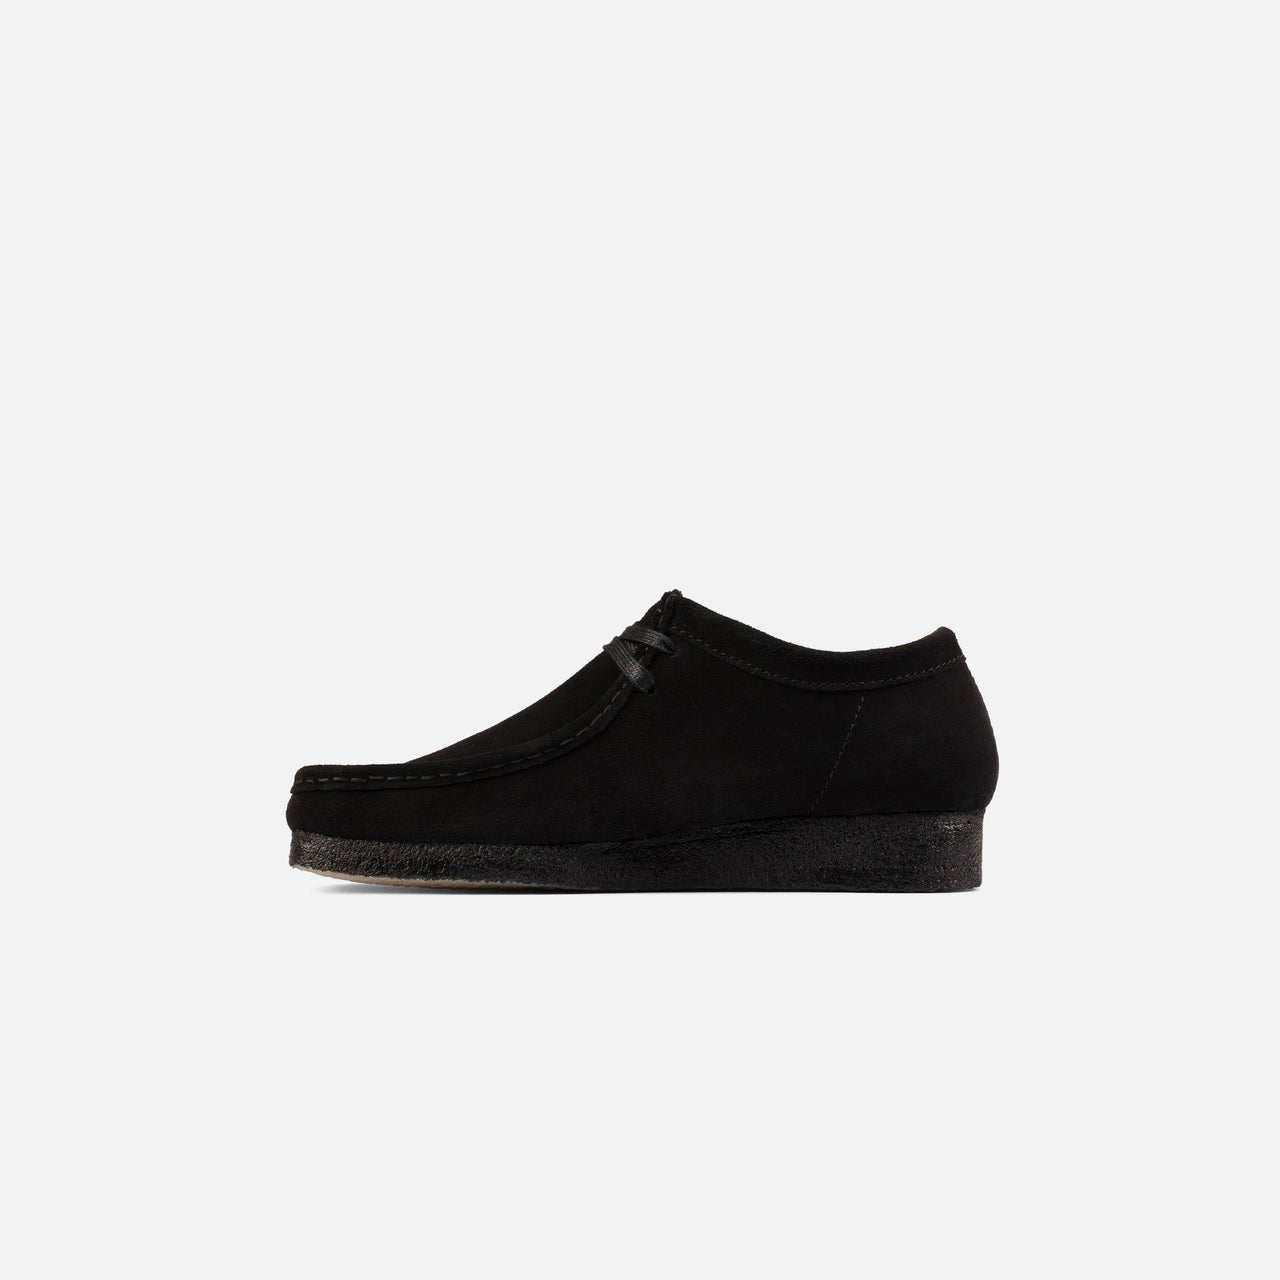 Stylish and comfortable women's Wallabee Low Black Suede 26155522 shoe